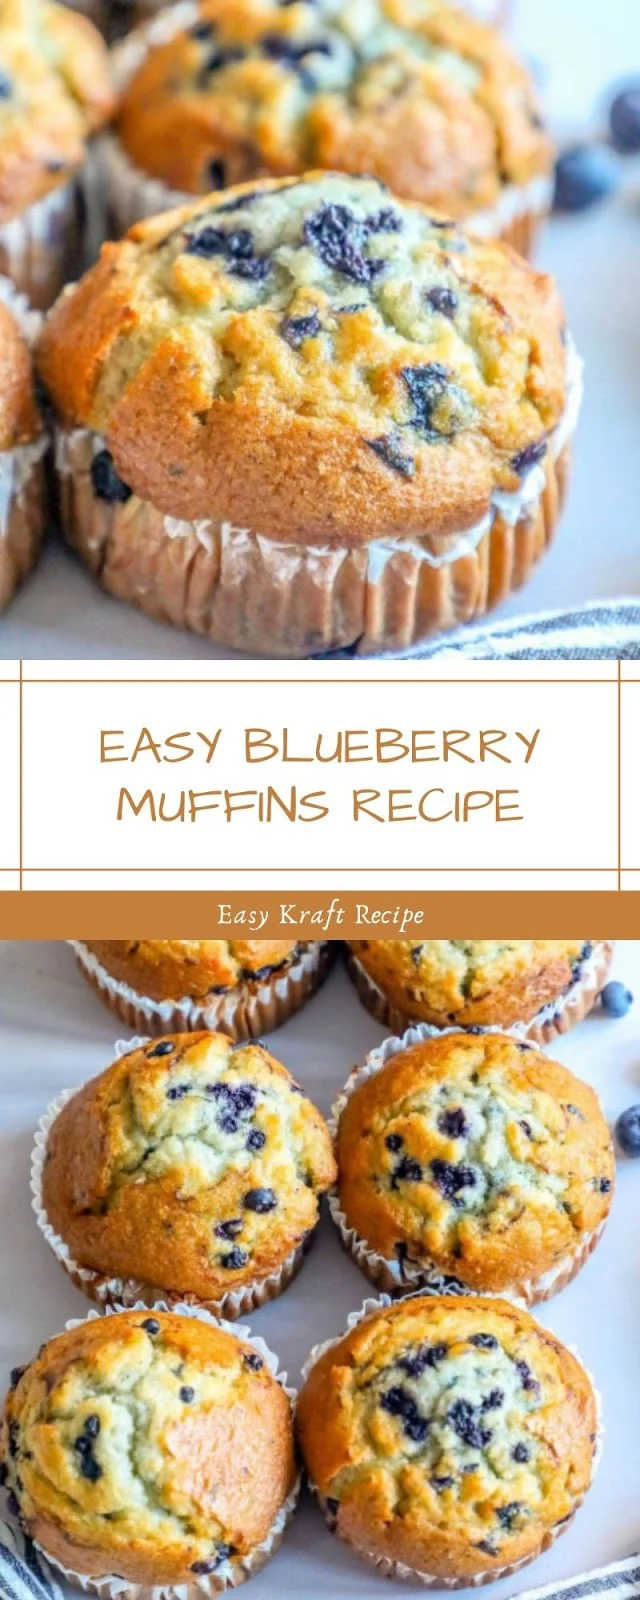 EASY BLUEBERRY MUFFINS RECIPE